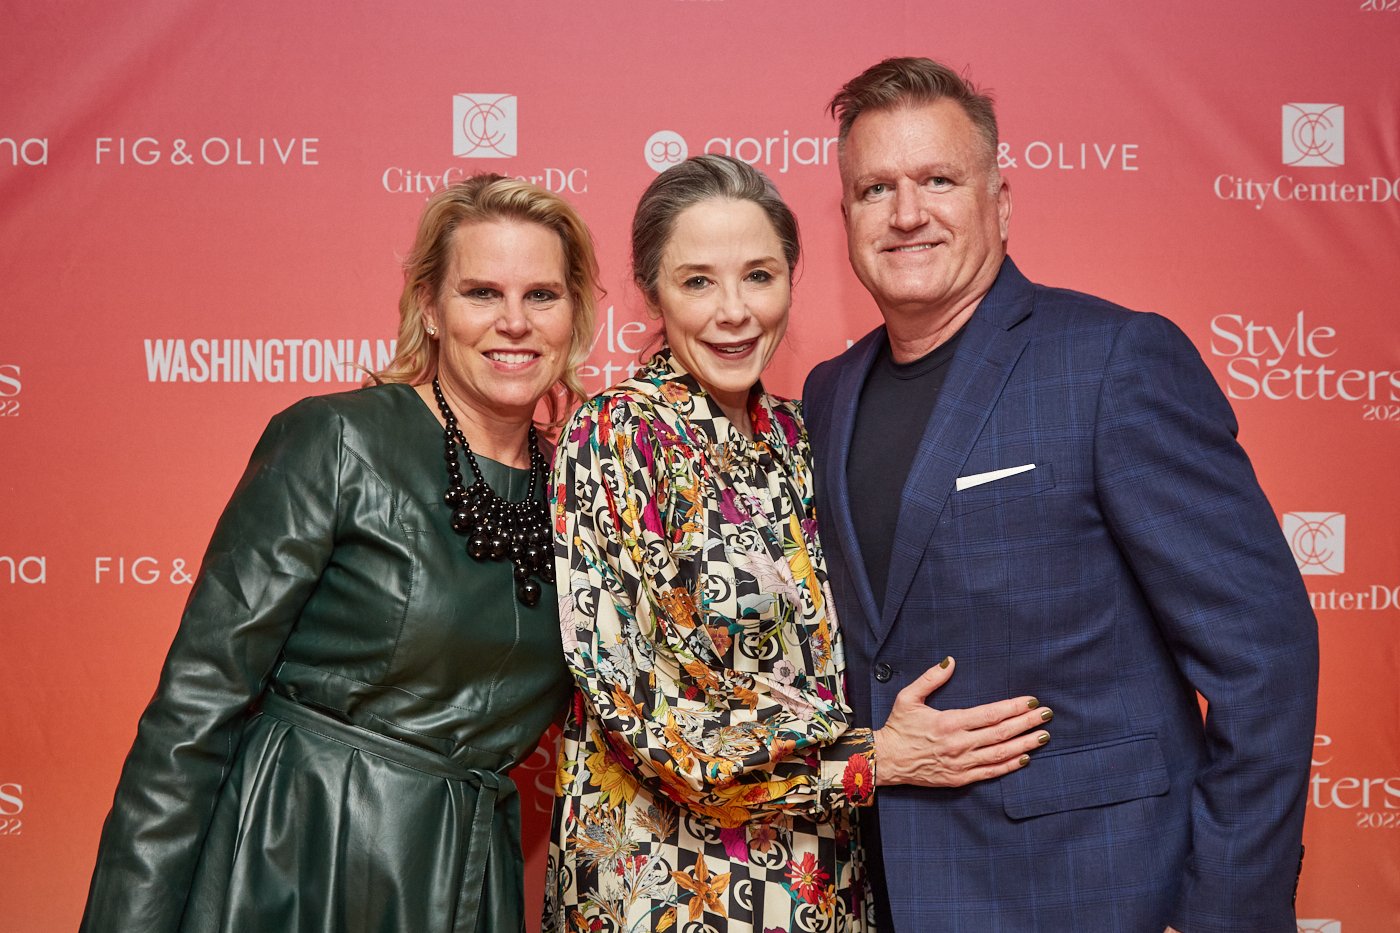 Washingtonian Style Setters 2022 Step & Repeat Photos CEO and President of Washingtonian, Catherine Merrill Williams, Heather Podesta, and Jim Bell